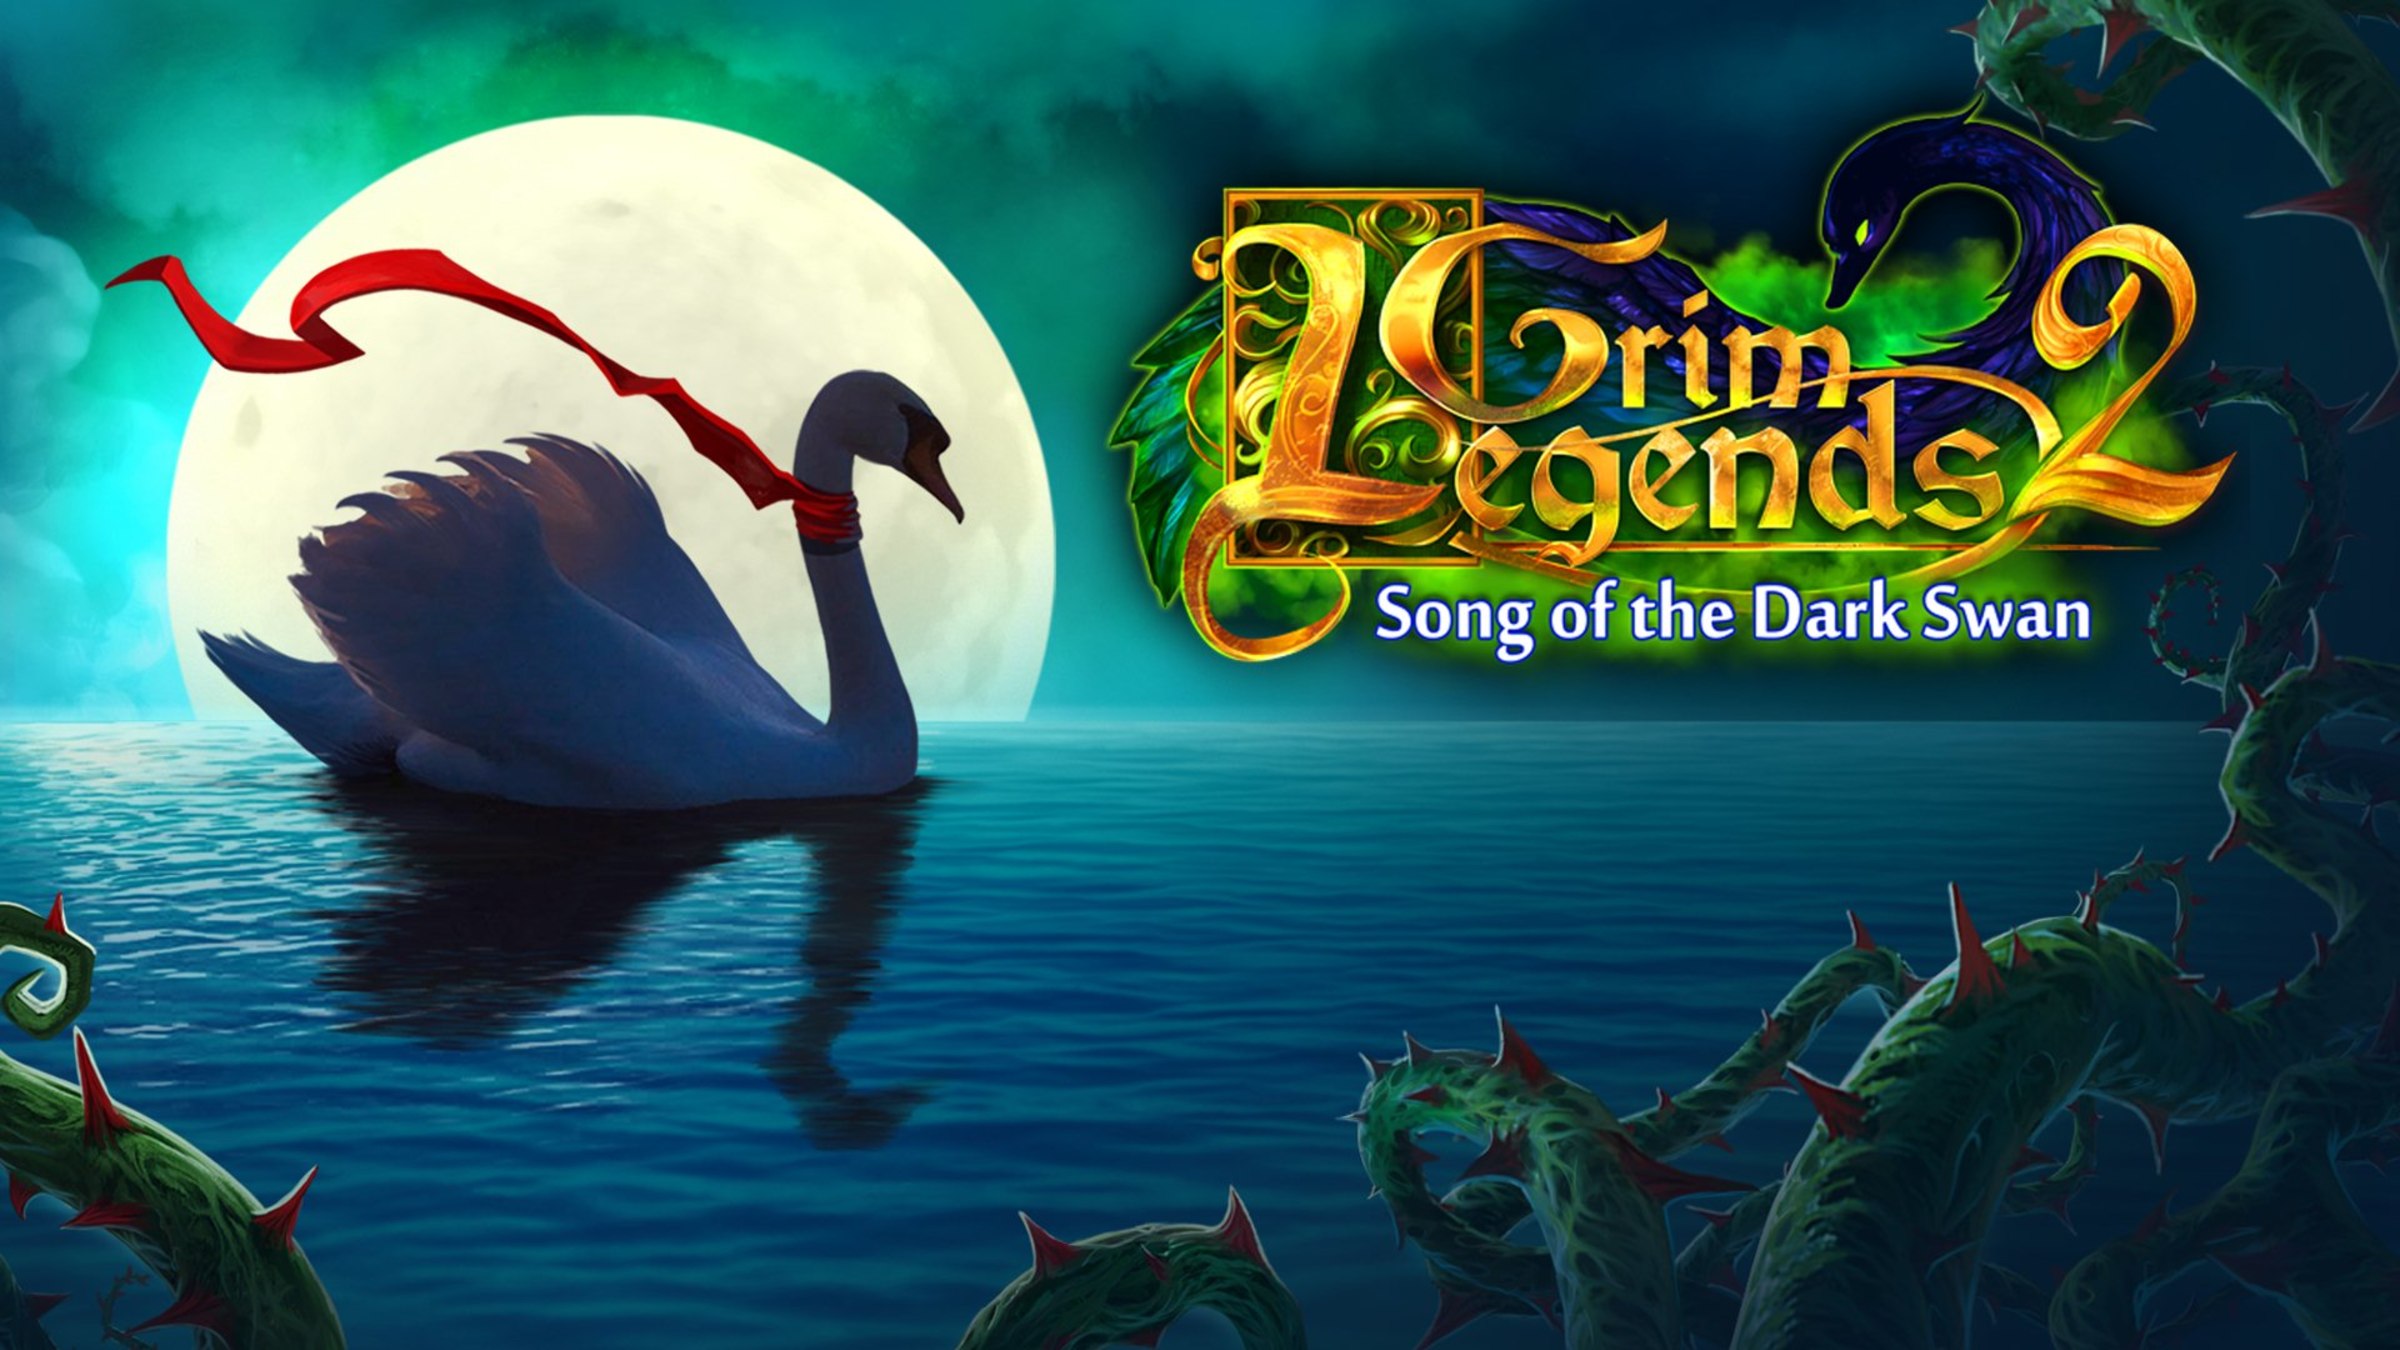 grim-legends-2-song-of-the-dark-swan-for-nintendo-switch-nintendo-official-site